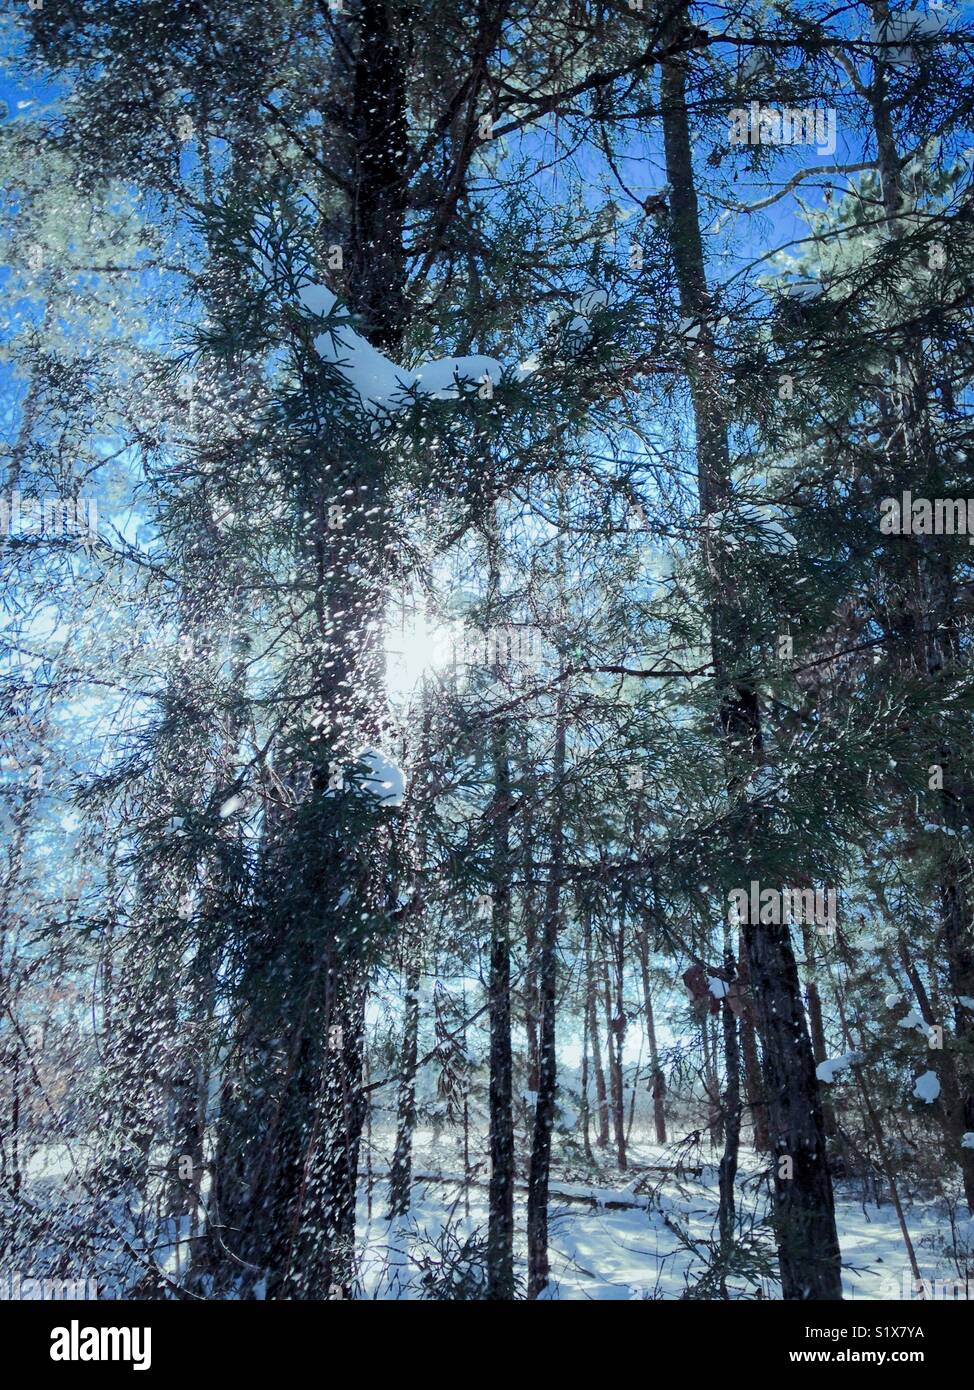 Wintery scene with pines, sun, and glistening snow falling from trees Stock Photo